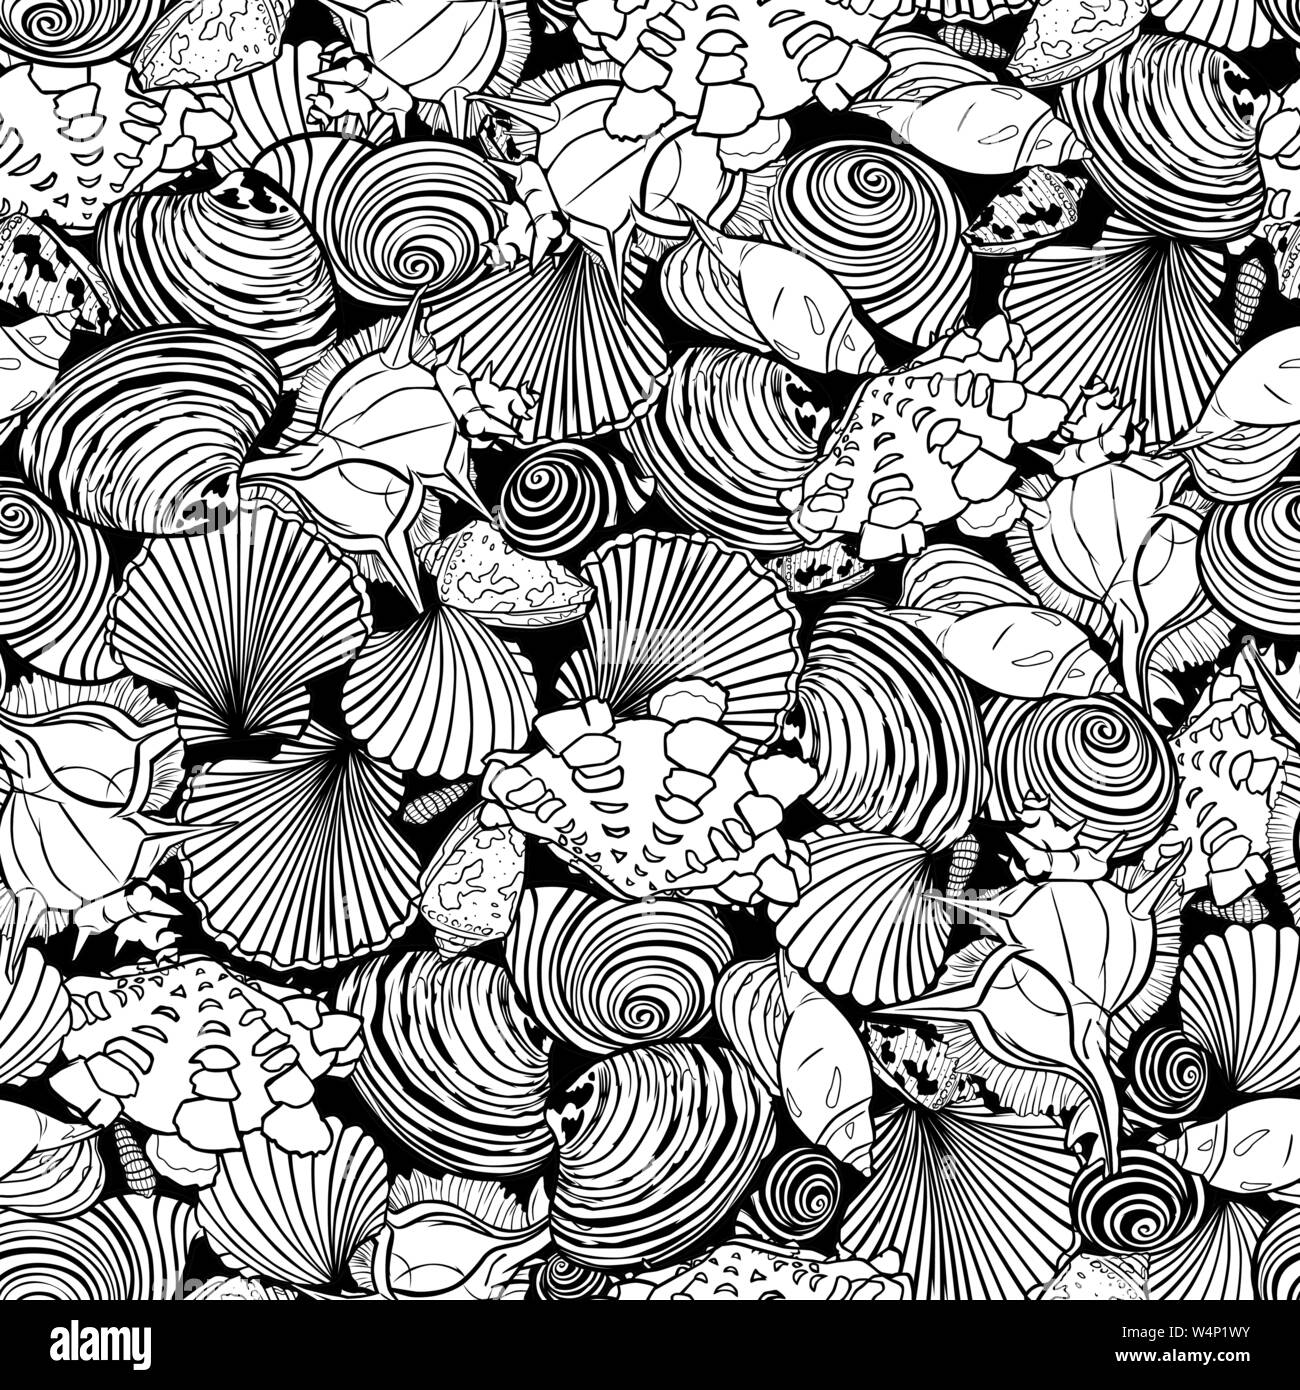 Vector black and white repeat pattern with variety of overlaping seashells. Perfect for fabric, scrapbooking, wallpaper projects. Stock Vector